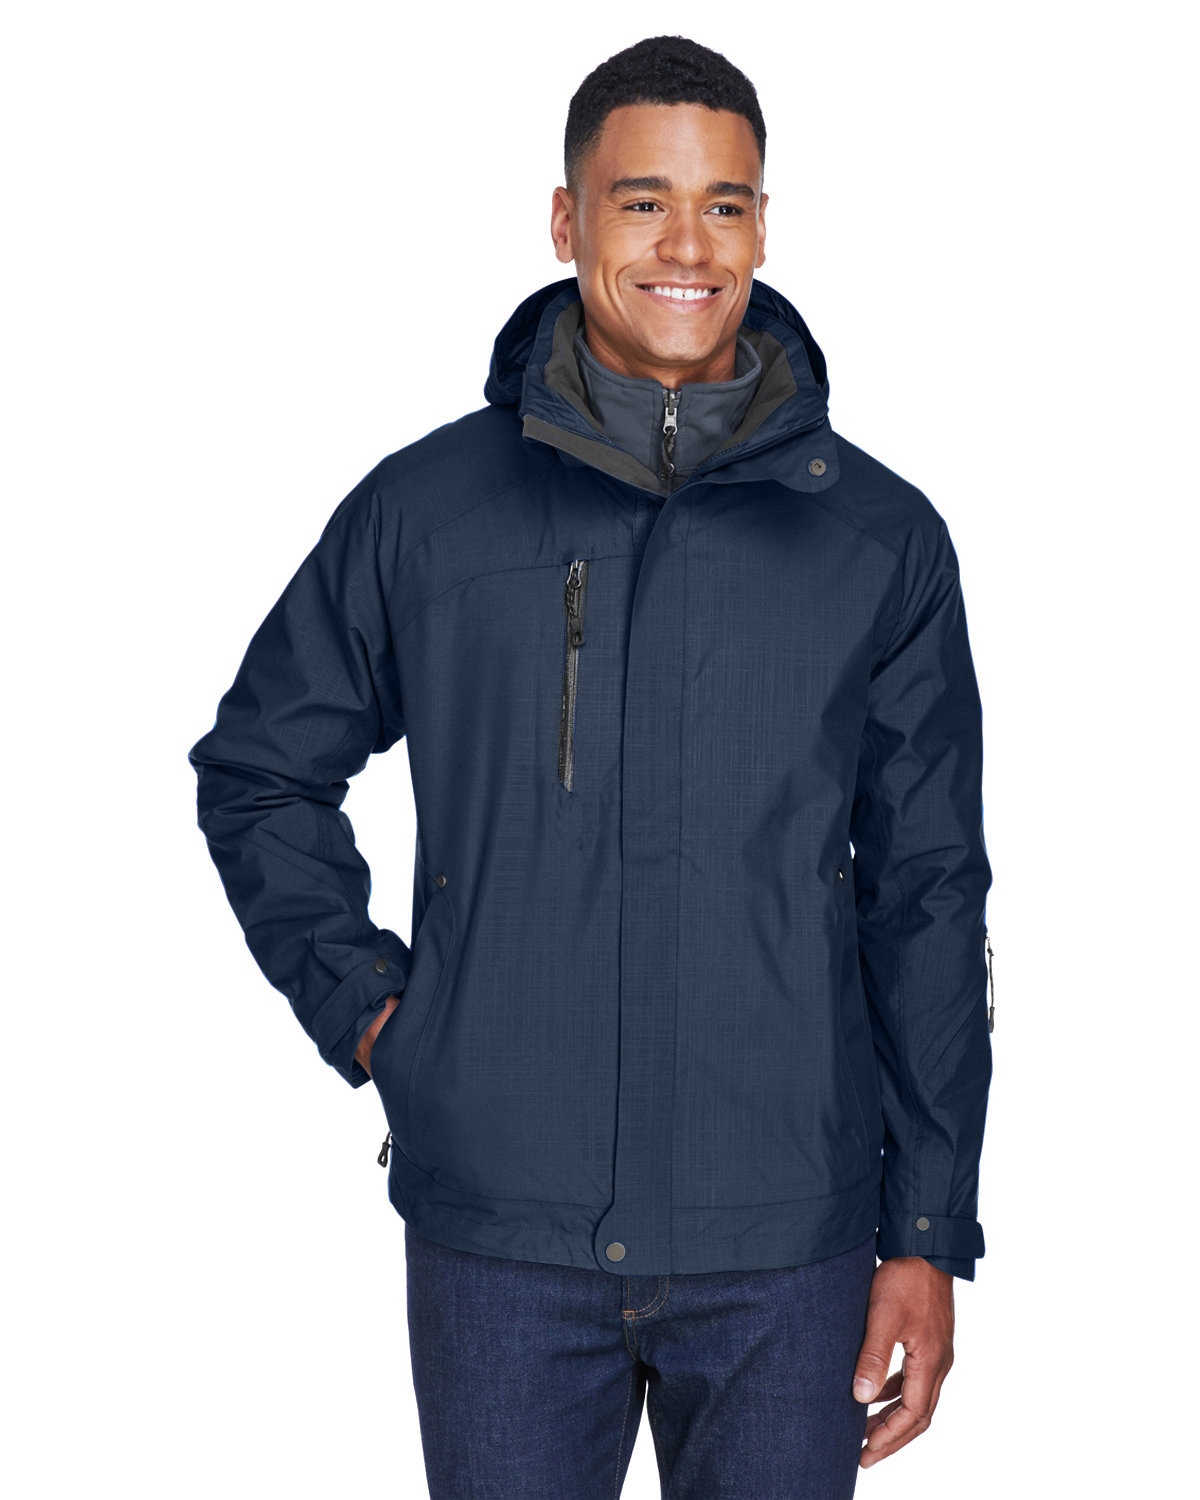 North End Men's Caprice 3-in-1 Jacket with Soft Shell Liner CLASSIC NAVY 